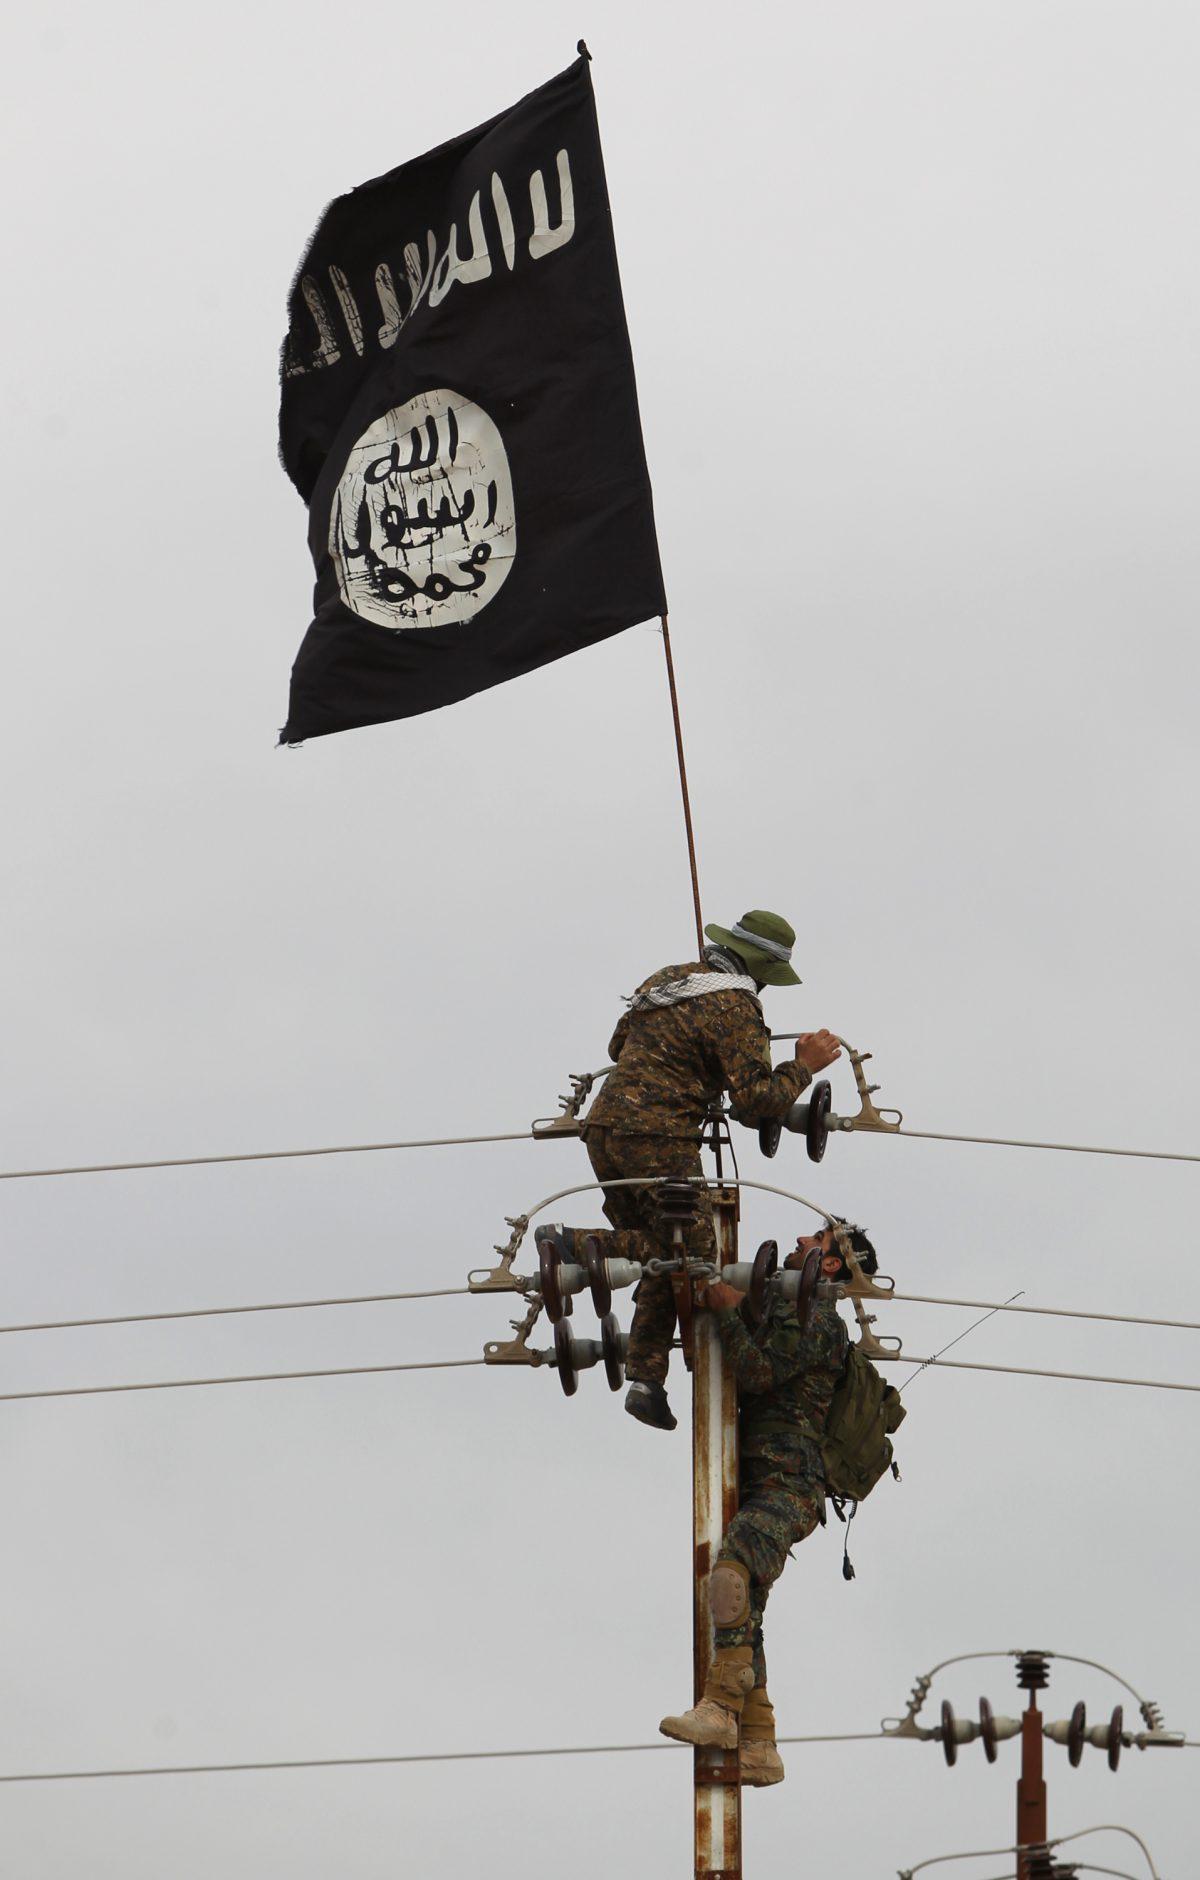 Iraqi Shiite fighters from the Popular Mobilization units take off an ISIS flag from an electricity pole during an operation in the desert of Samarra aimed at retaking areas from ISIS jihadists on March 3, 2016. (Ahmad al-Rubaye/AFP/Getty Images)